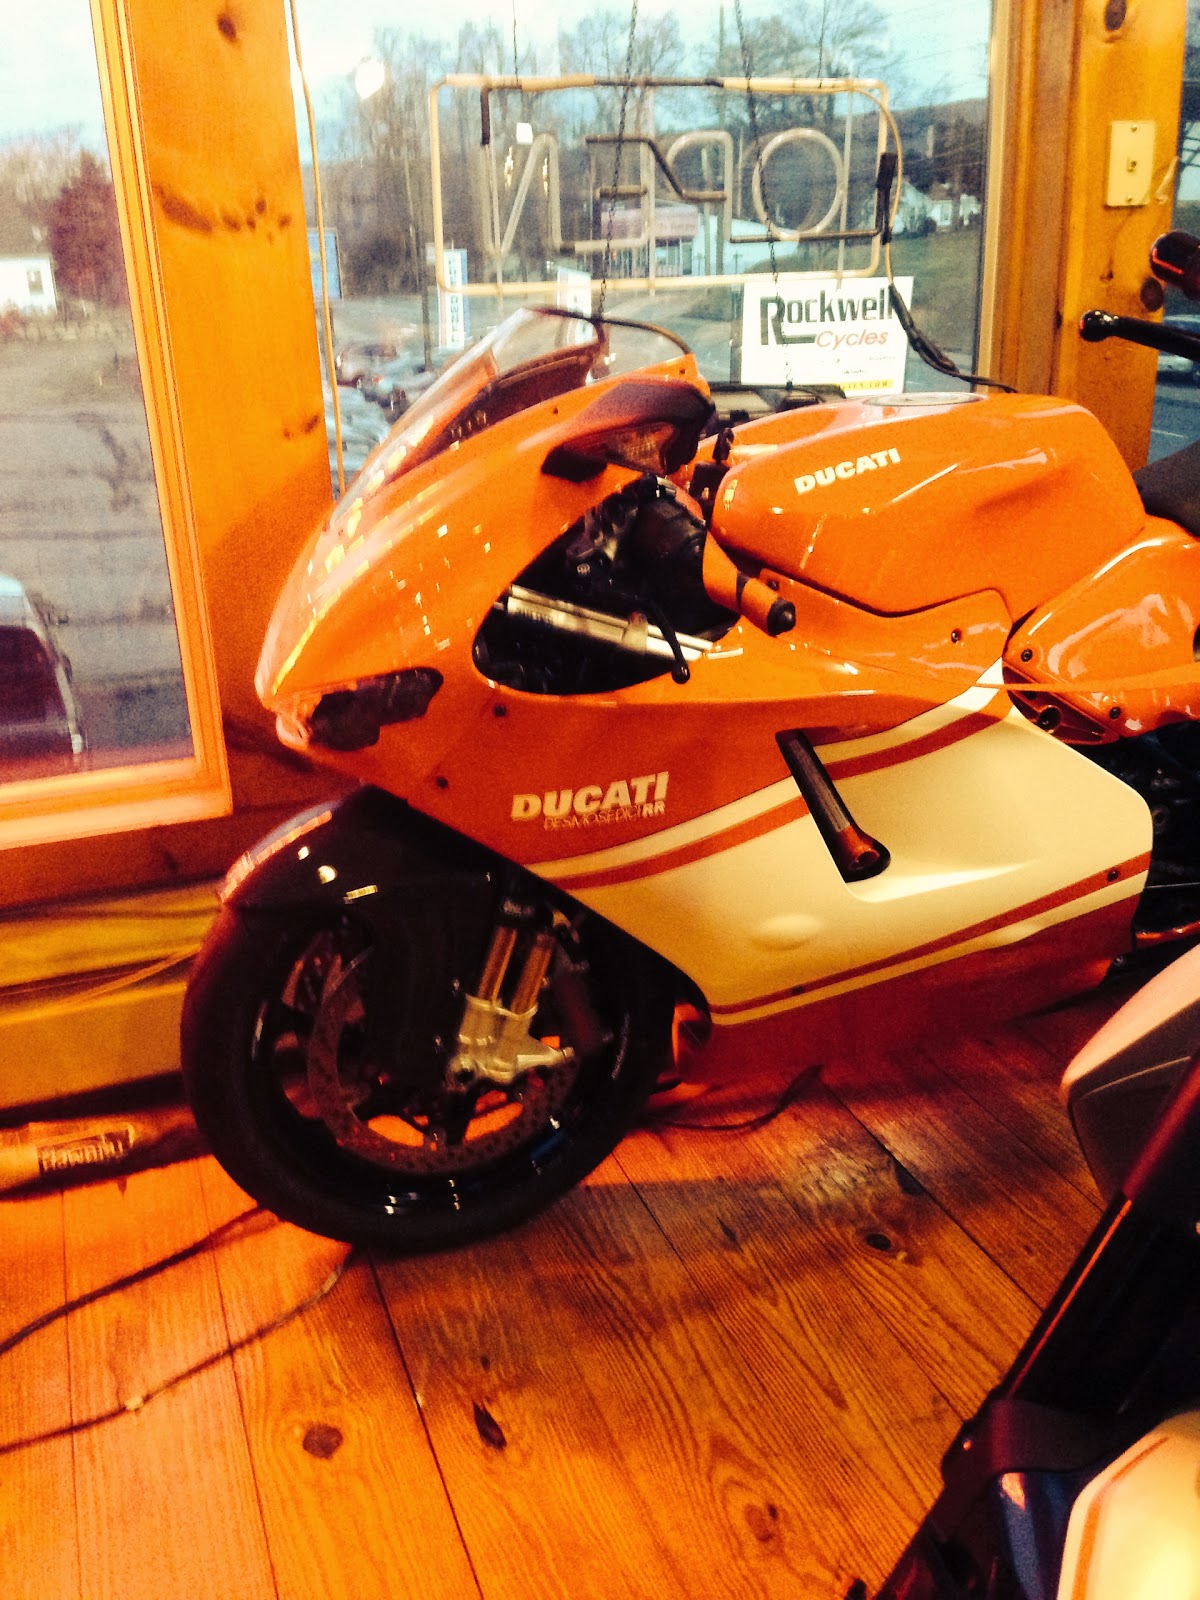  Rockwell Cycle and DESMO Ducati Holiday Parties with the DOCNYC from Tigho NYDUCATI Desmodici RR Panigale